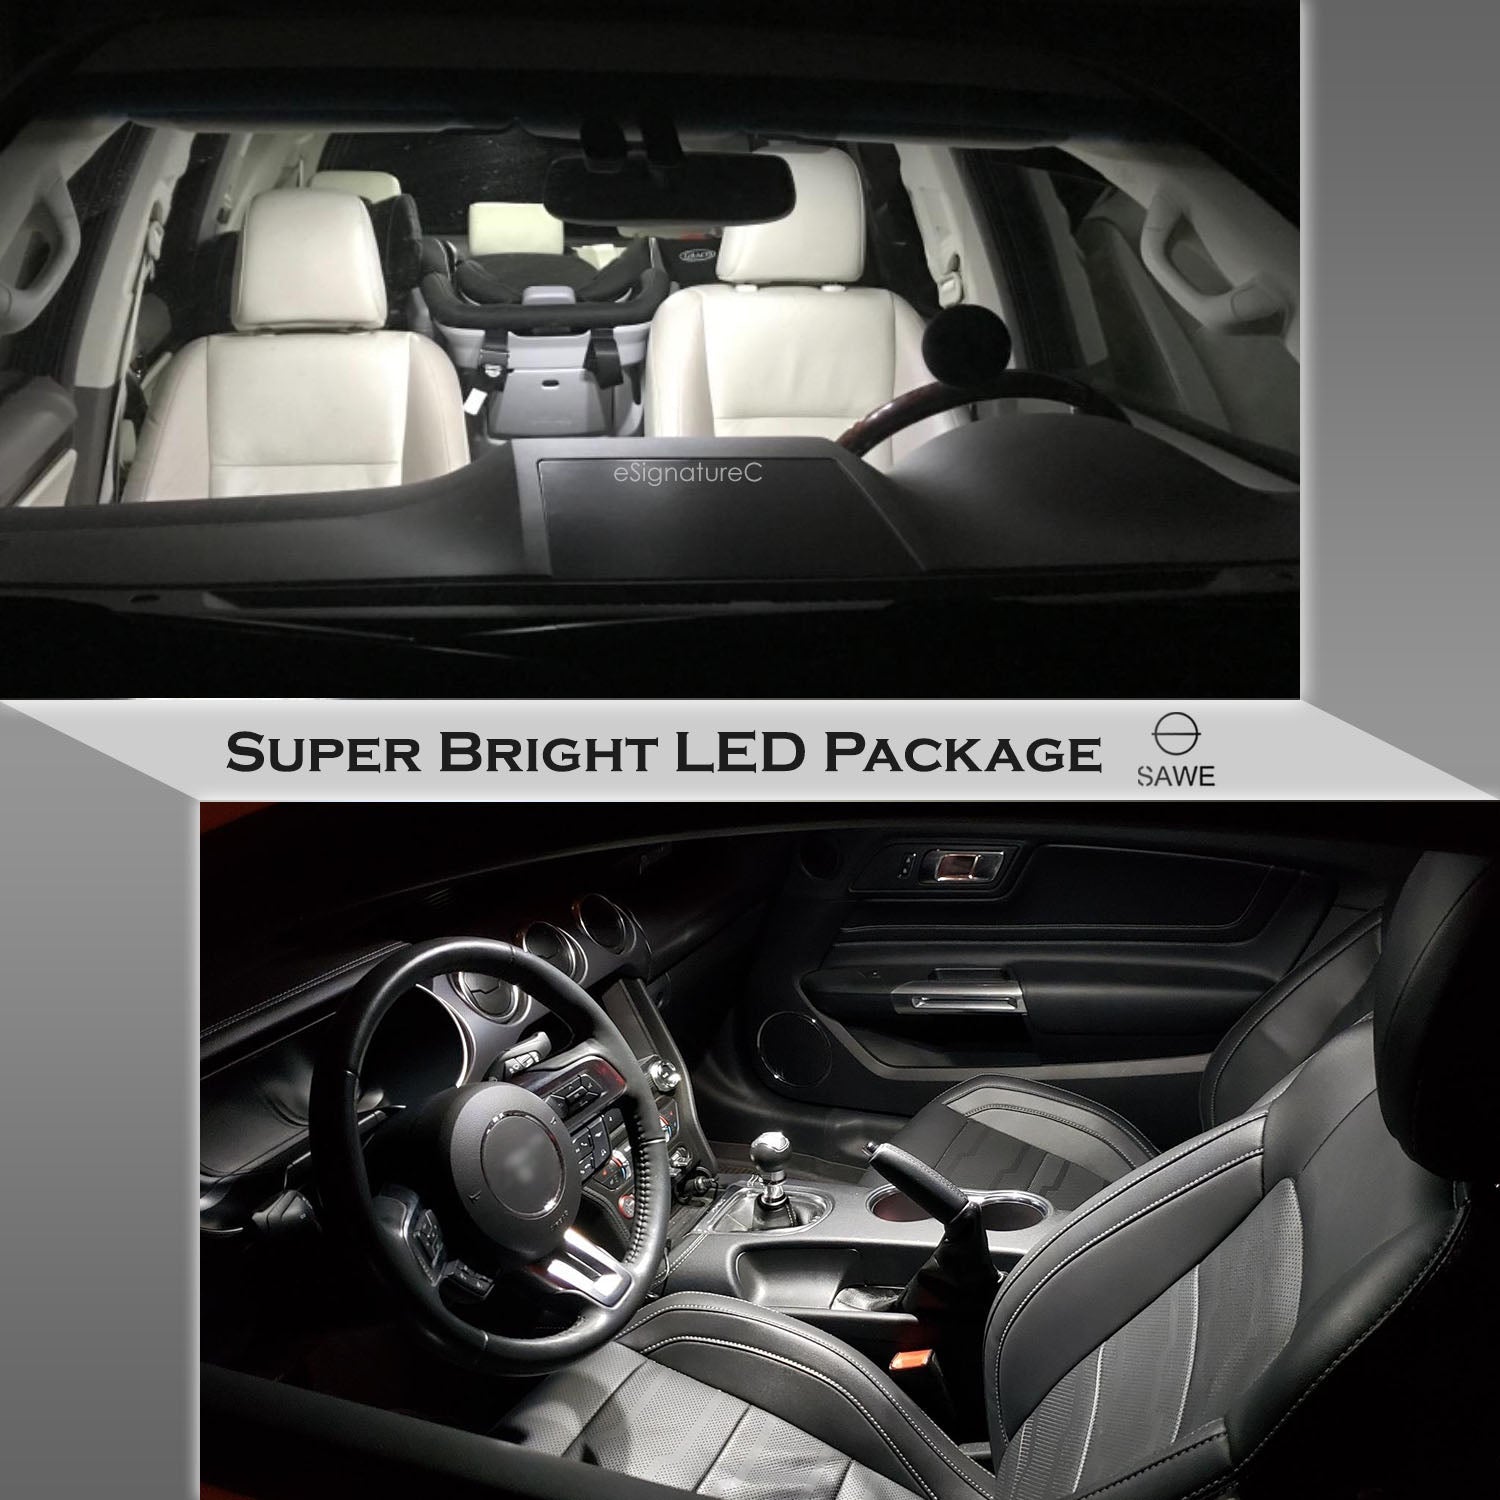 For Subaru Legacy Interior LED Lights - Dome & Map Light Bulbs Package Kit for 2015 - 2019 - White